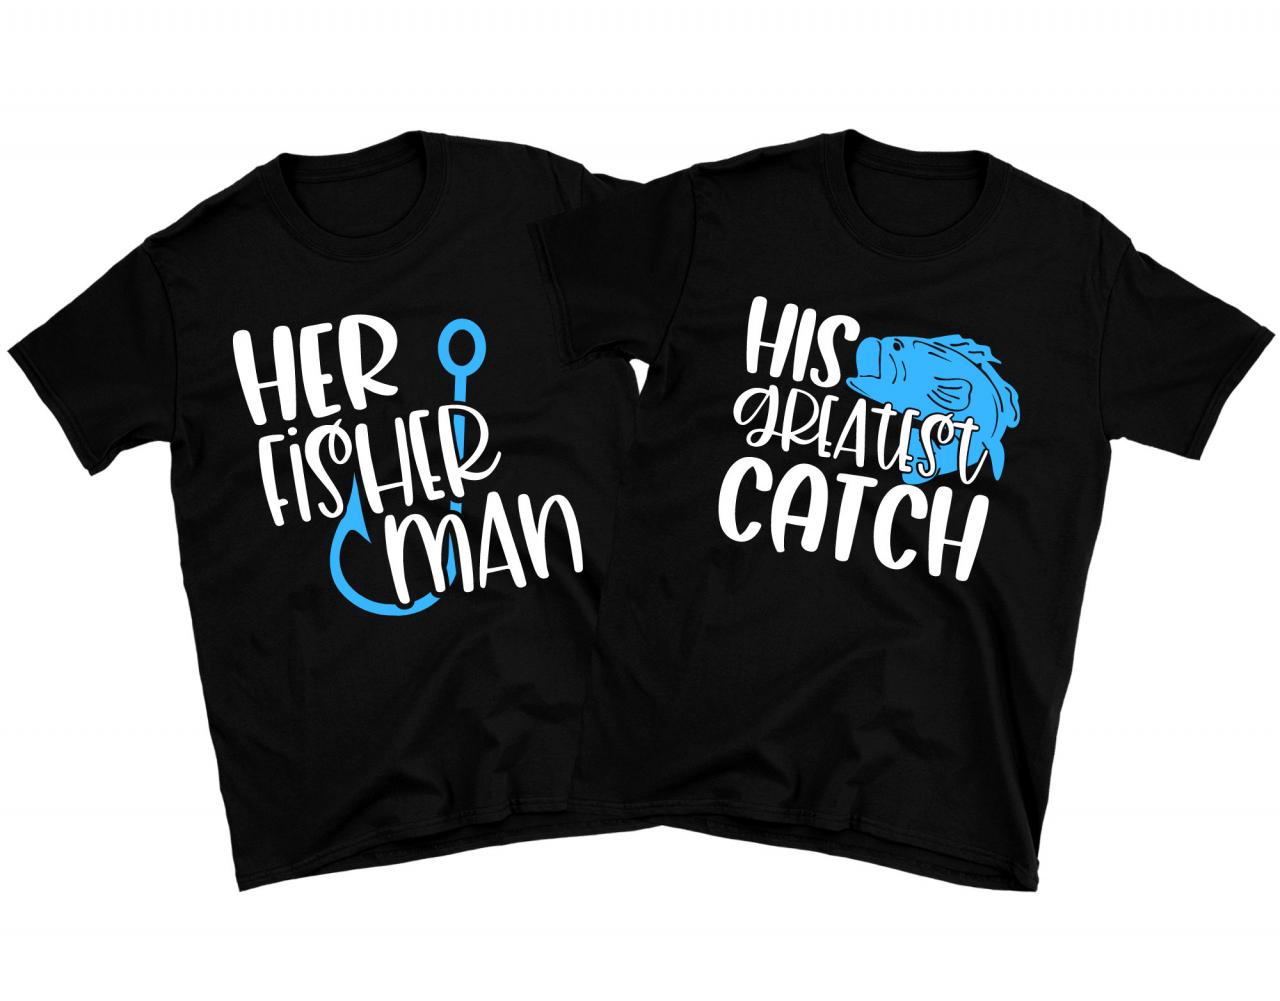 Fisherman Couple Shirts Fisherman Valentines Gift Her His Couple Matching  Wedding Gifts Engagement Announcement Tees Honeymoon Shirts